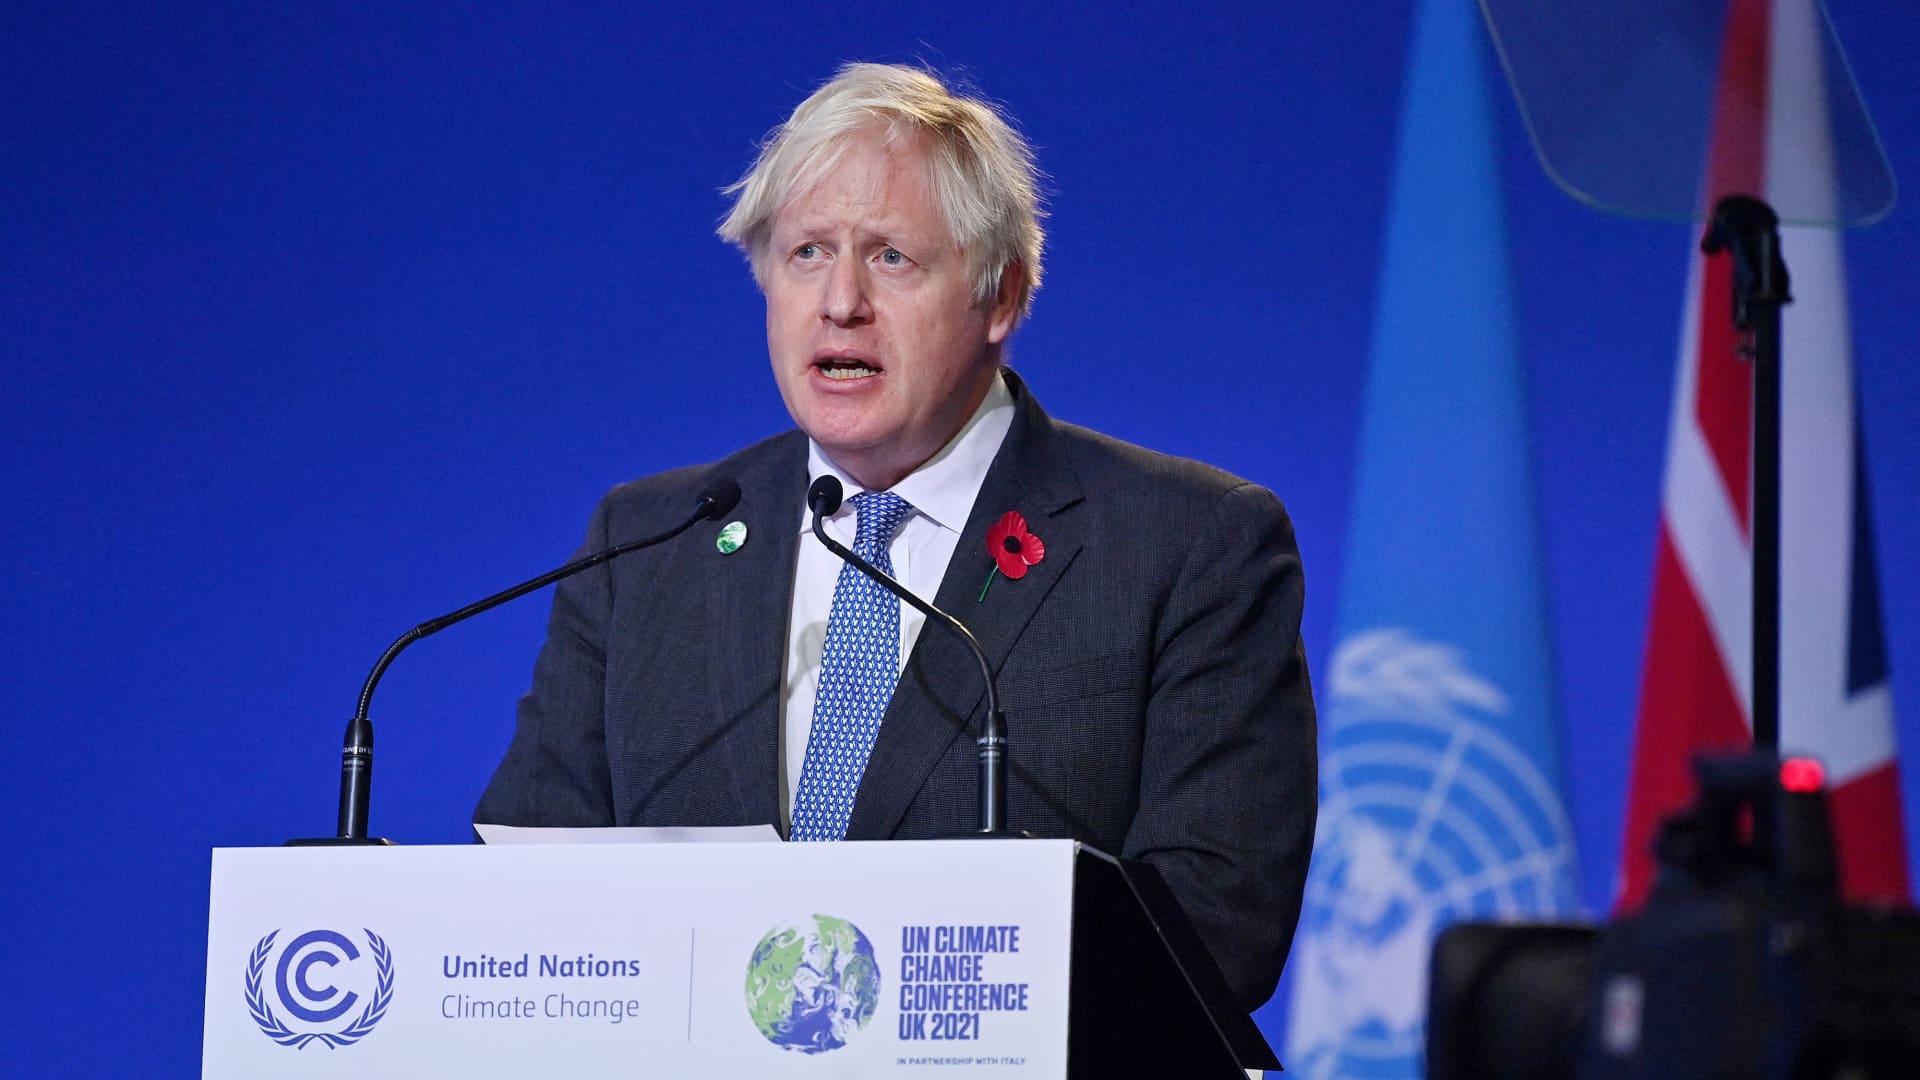 Britain's Prime Minister Boris Johnson speaks during the opening ceremony of the COP26 UN Climate Change Conference in Glasgow, Scotland on November 1, 2021.